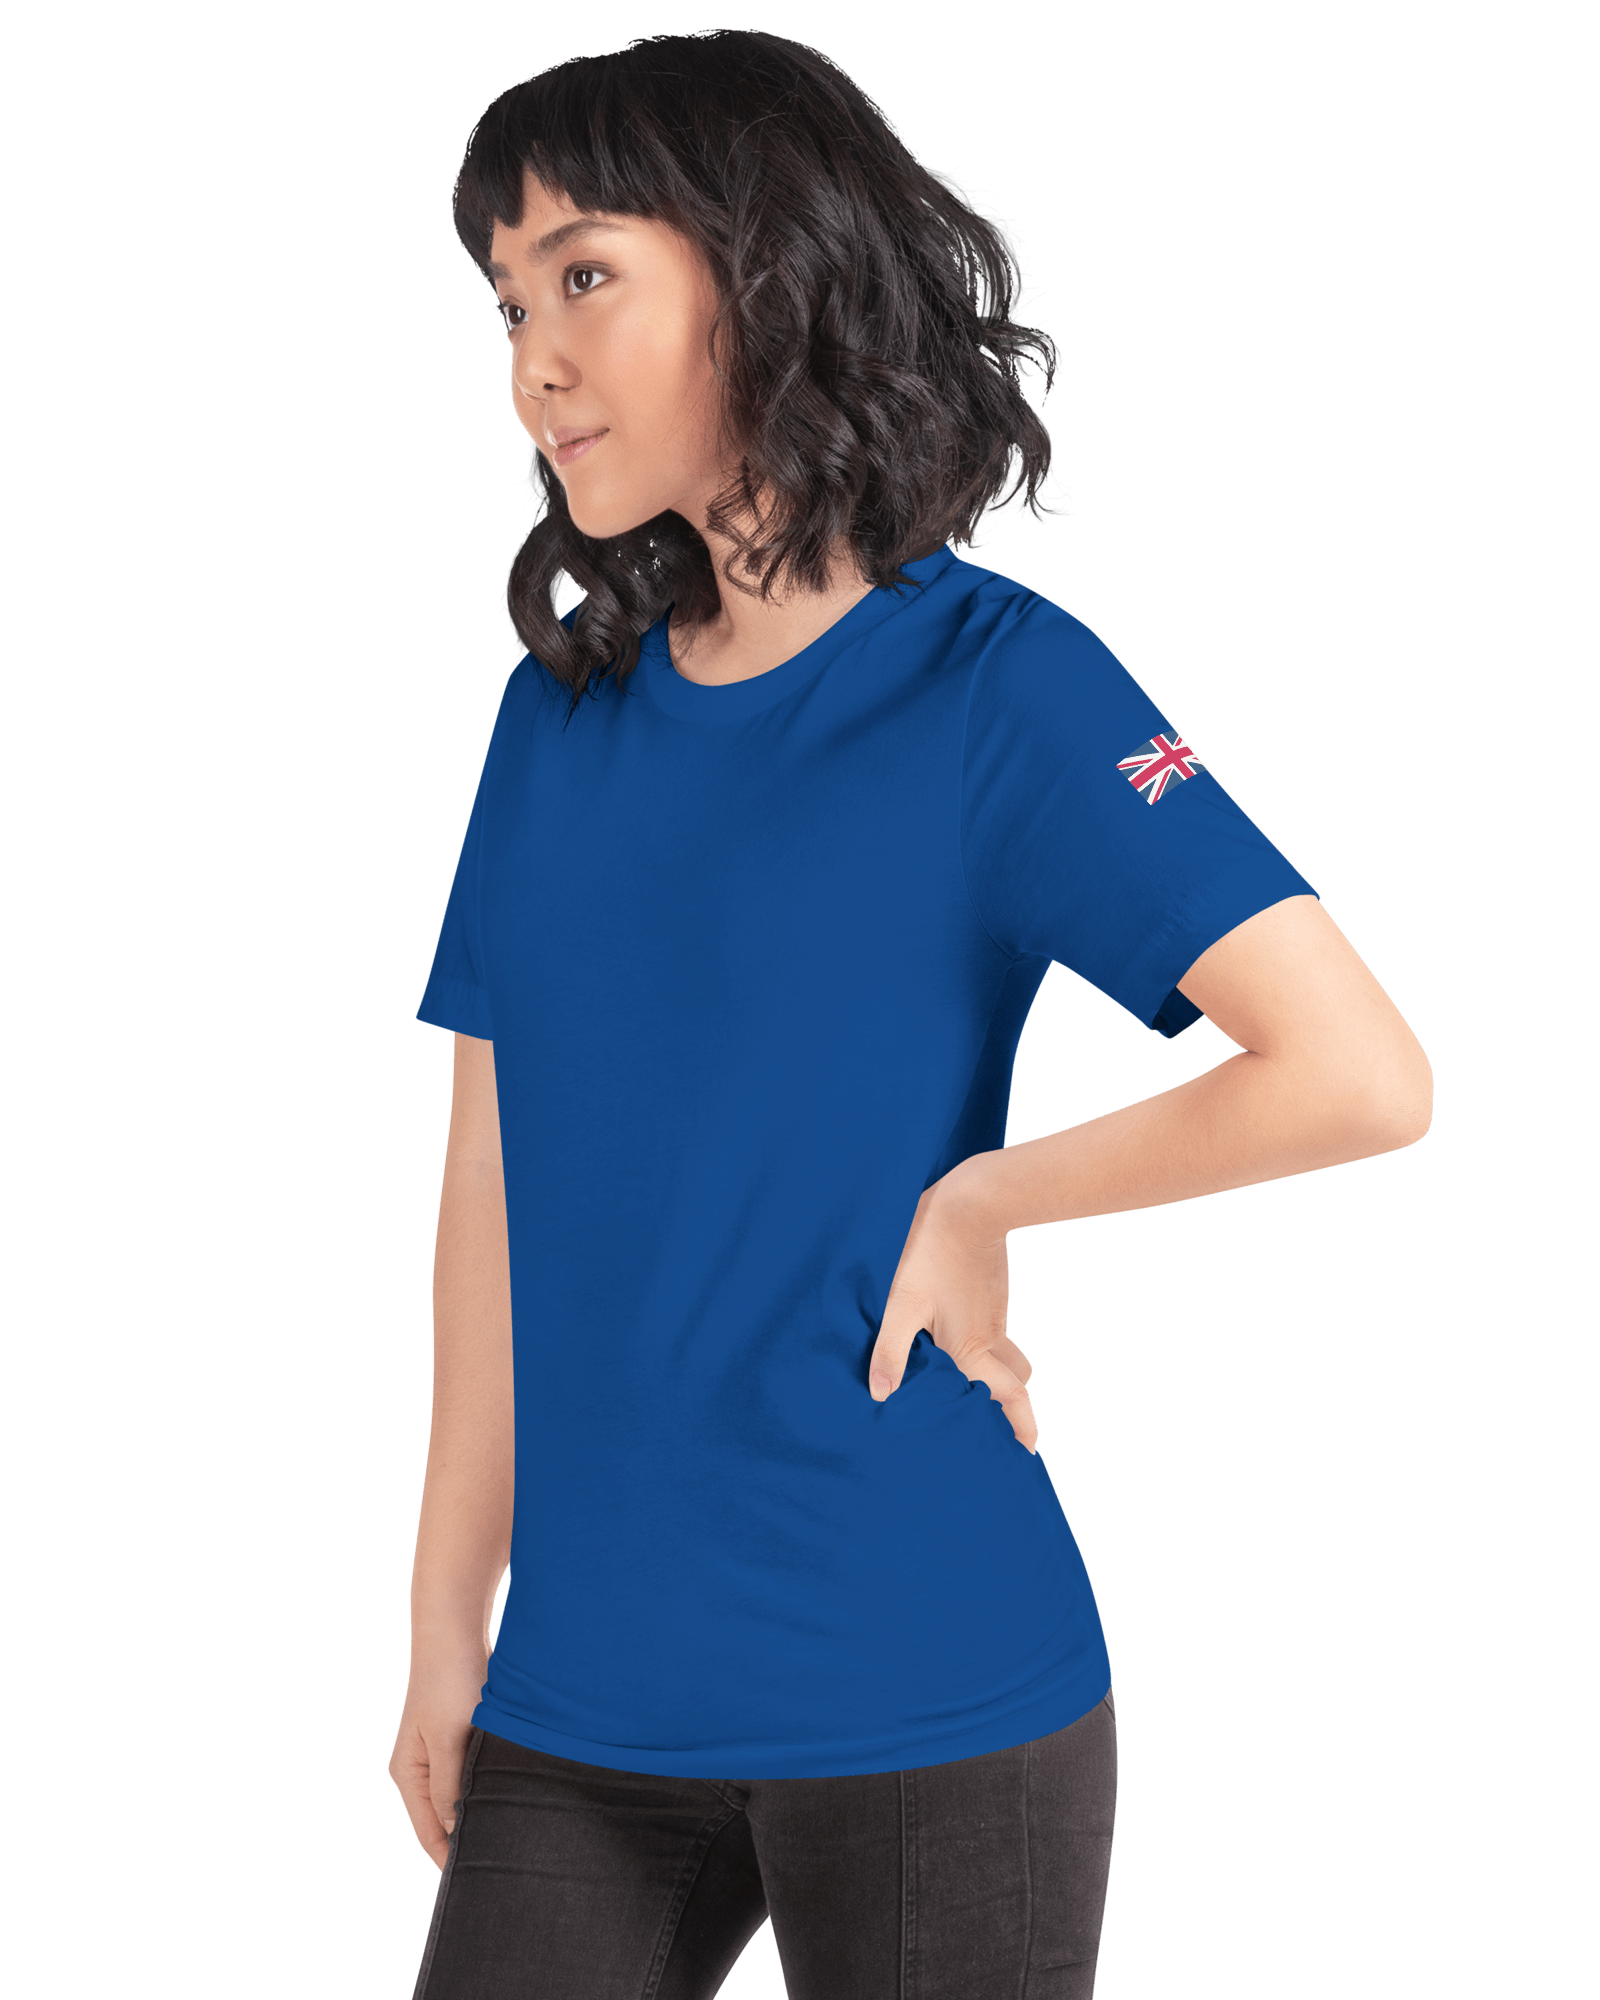 Union Jack GB T-shirt | Both Sleeves | Unisex Fit Shirts & Tops Jolly & Goode